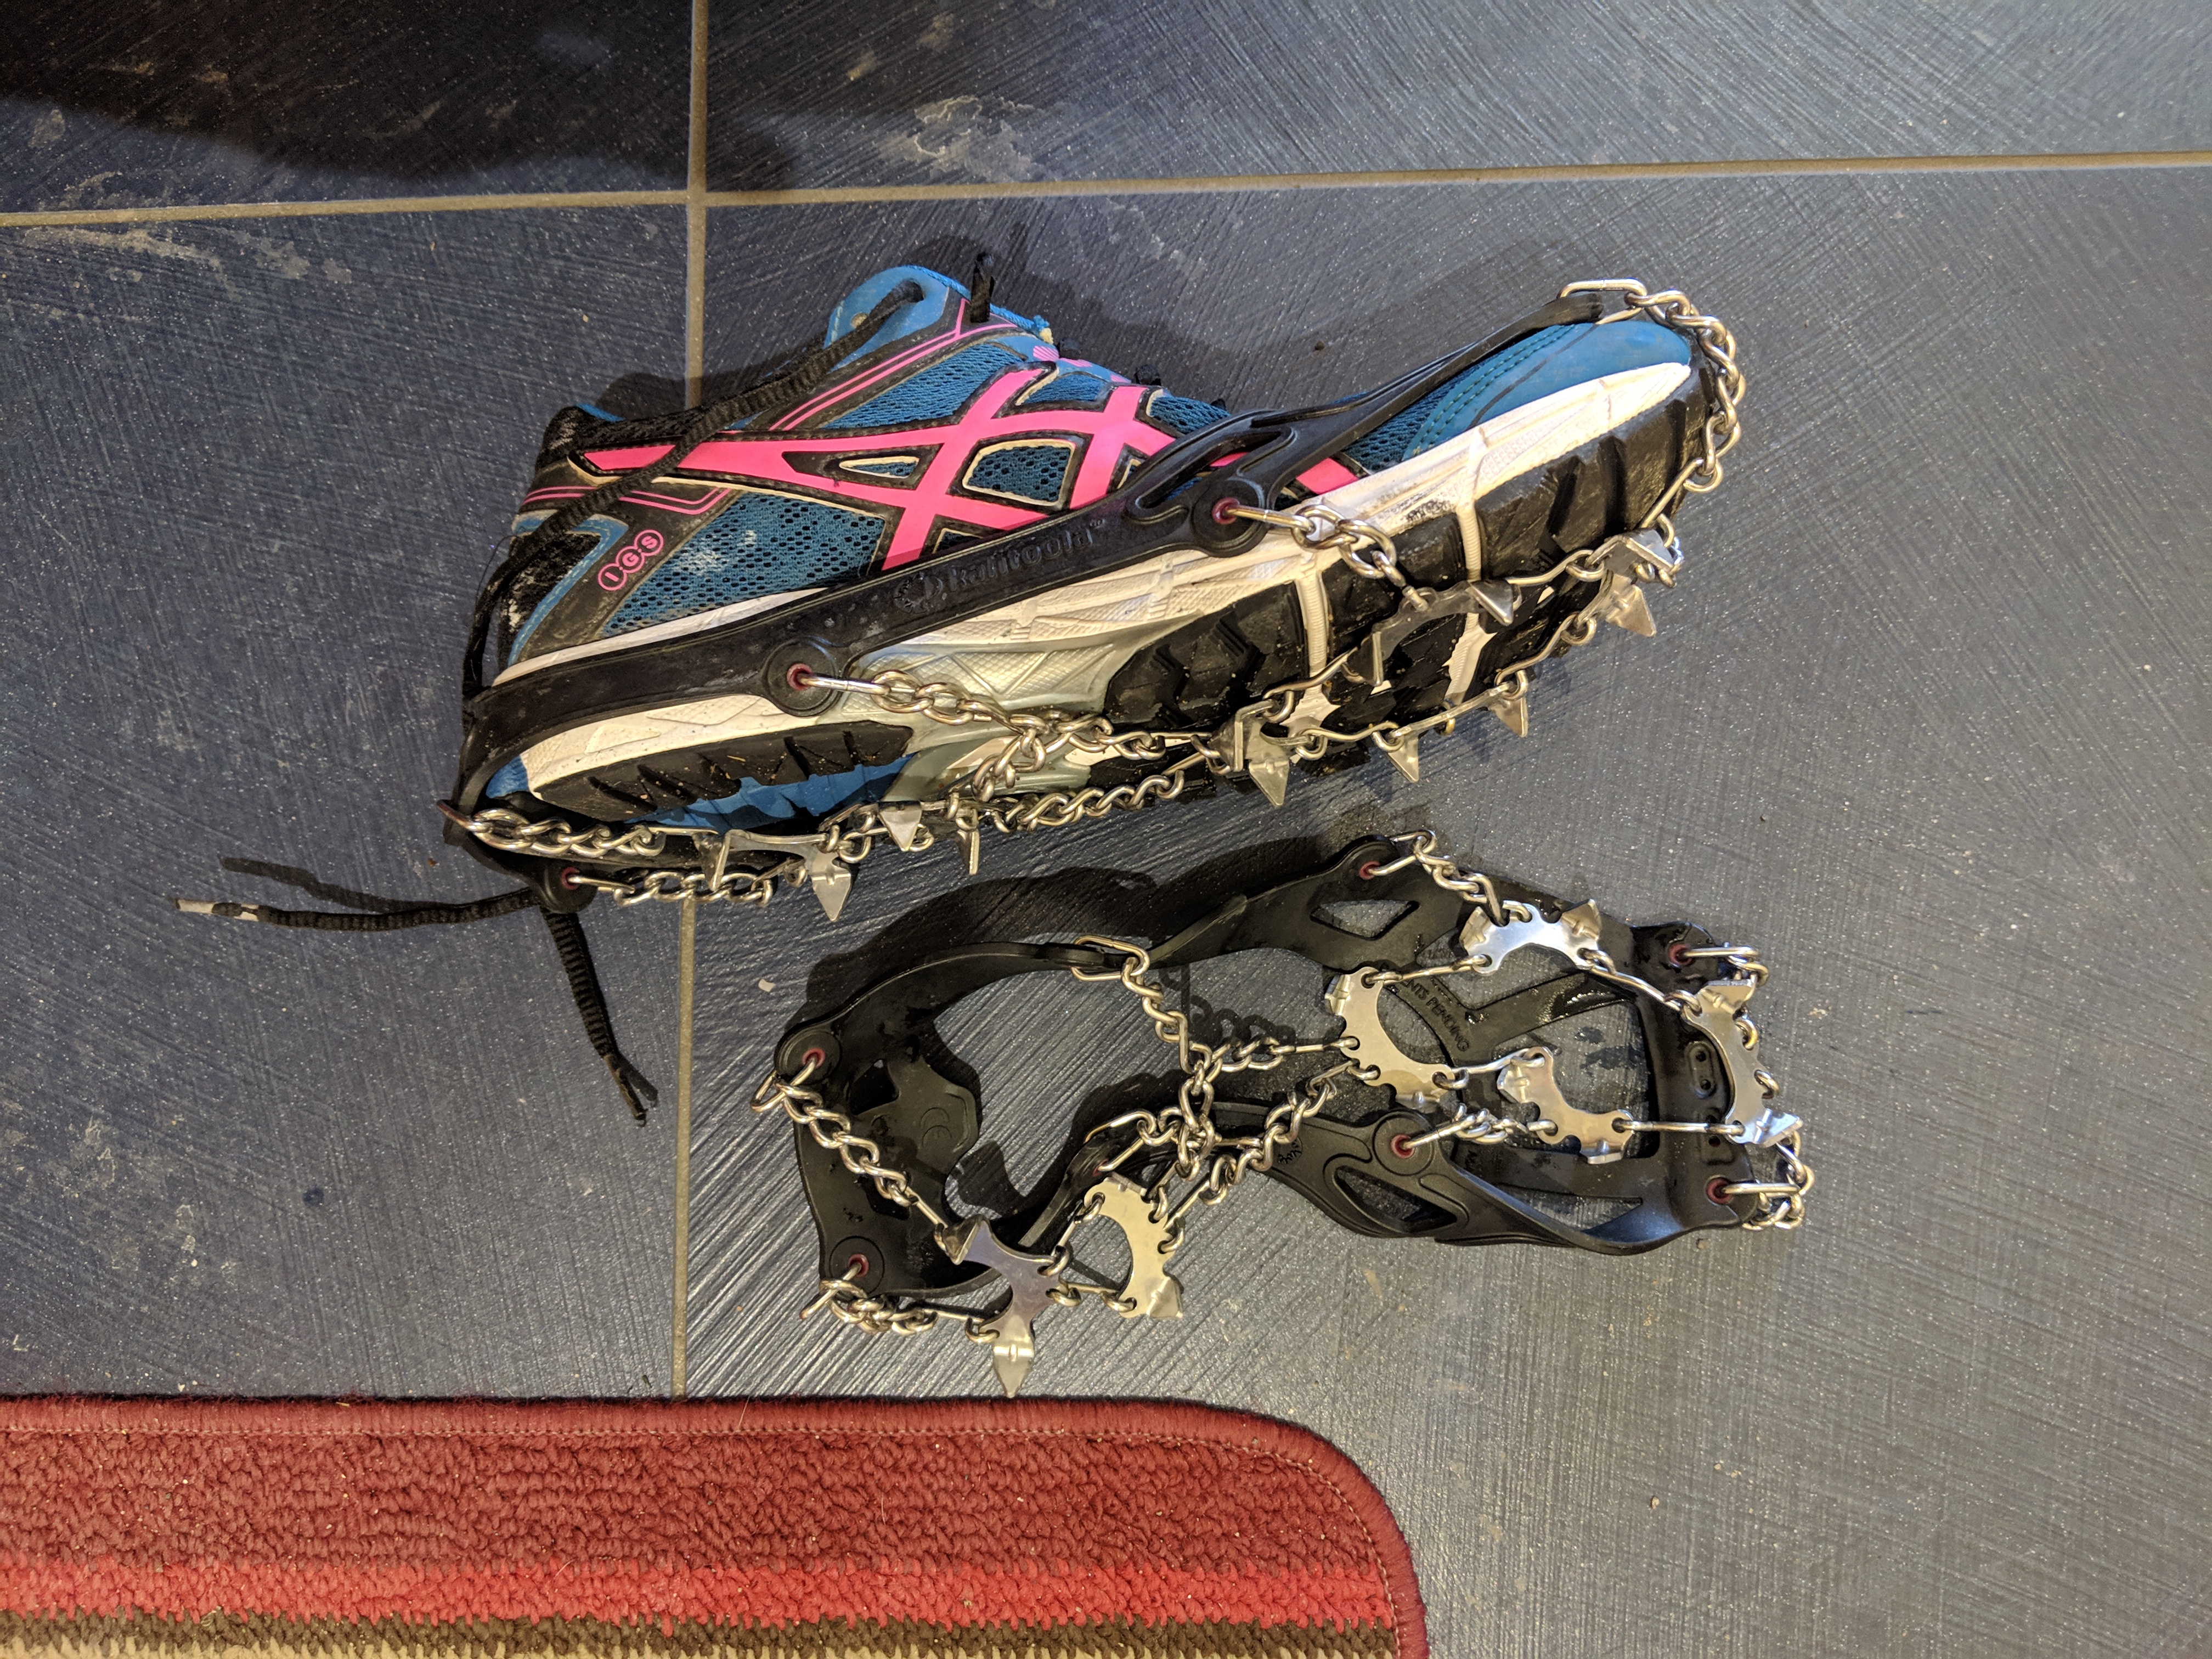 Winter running – review of Microspikes 